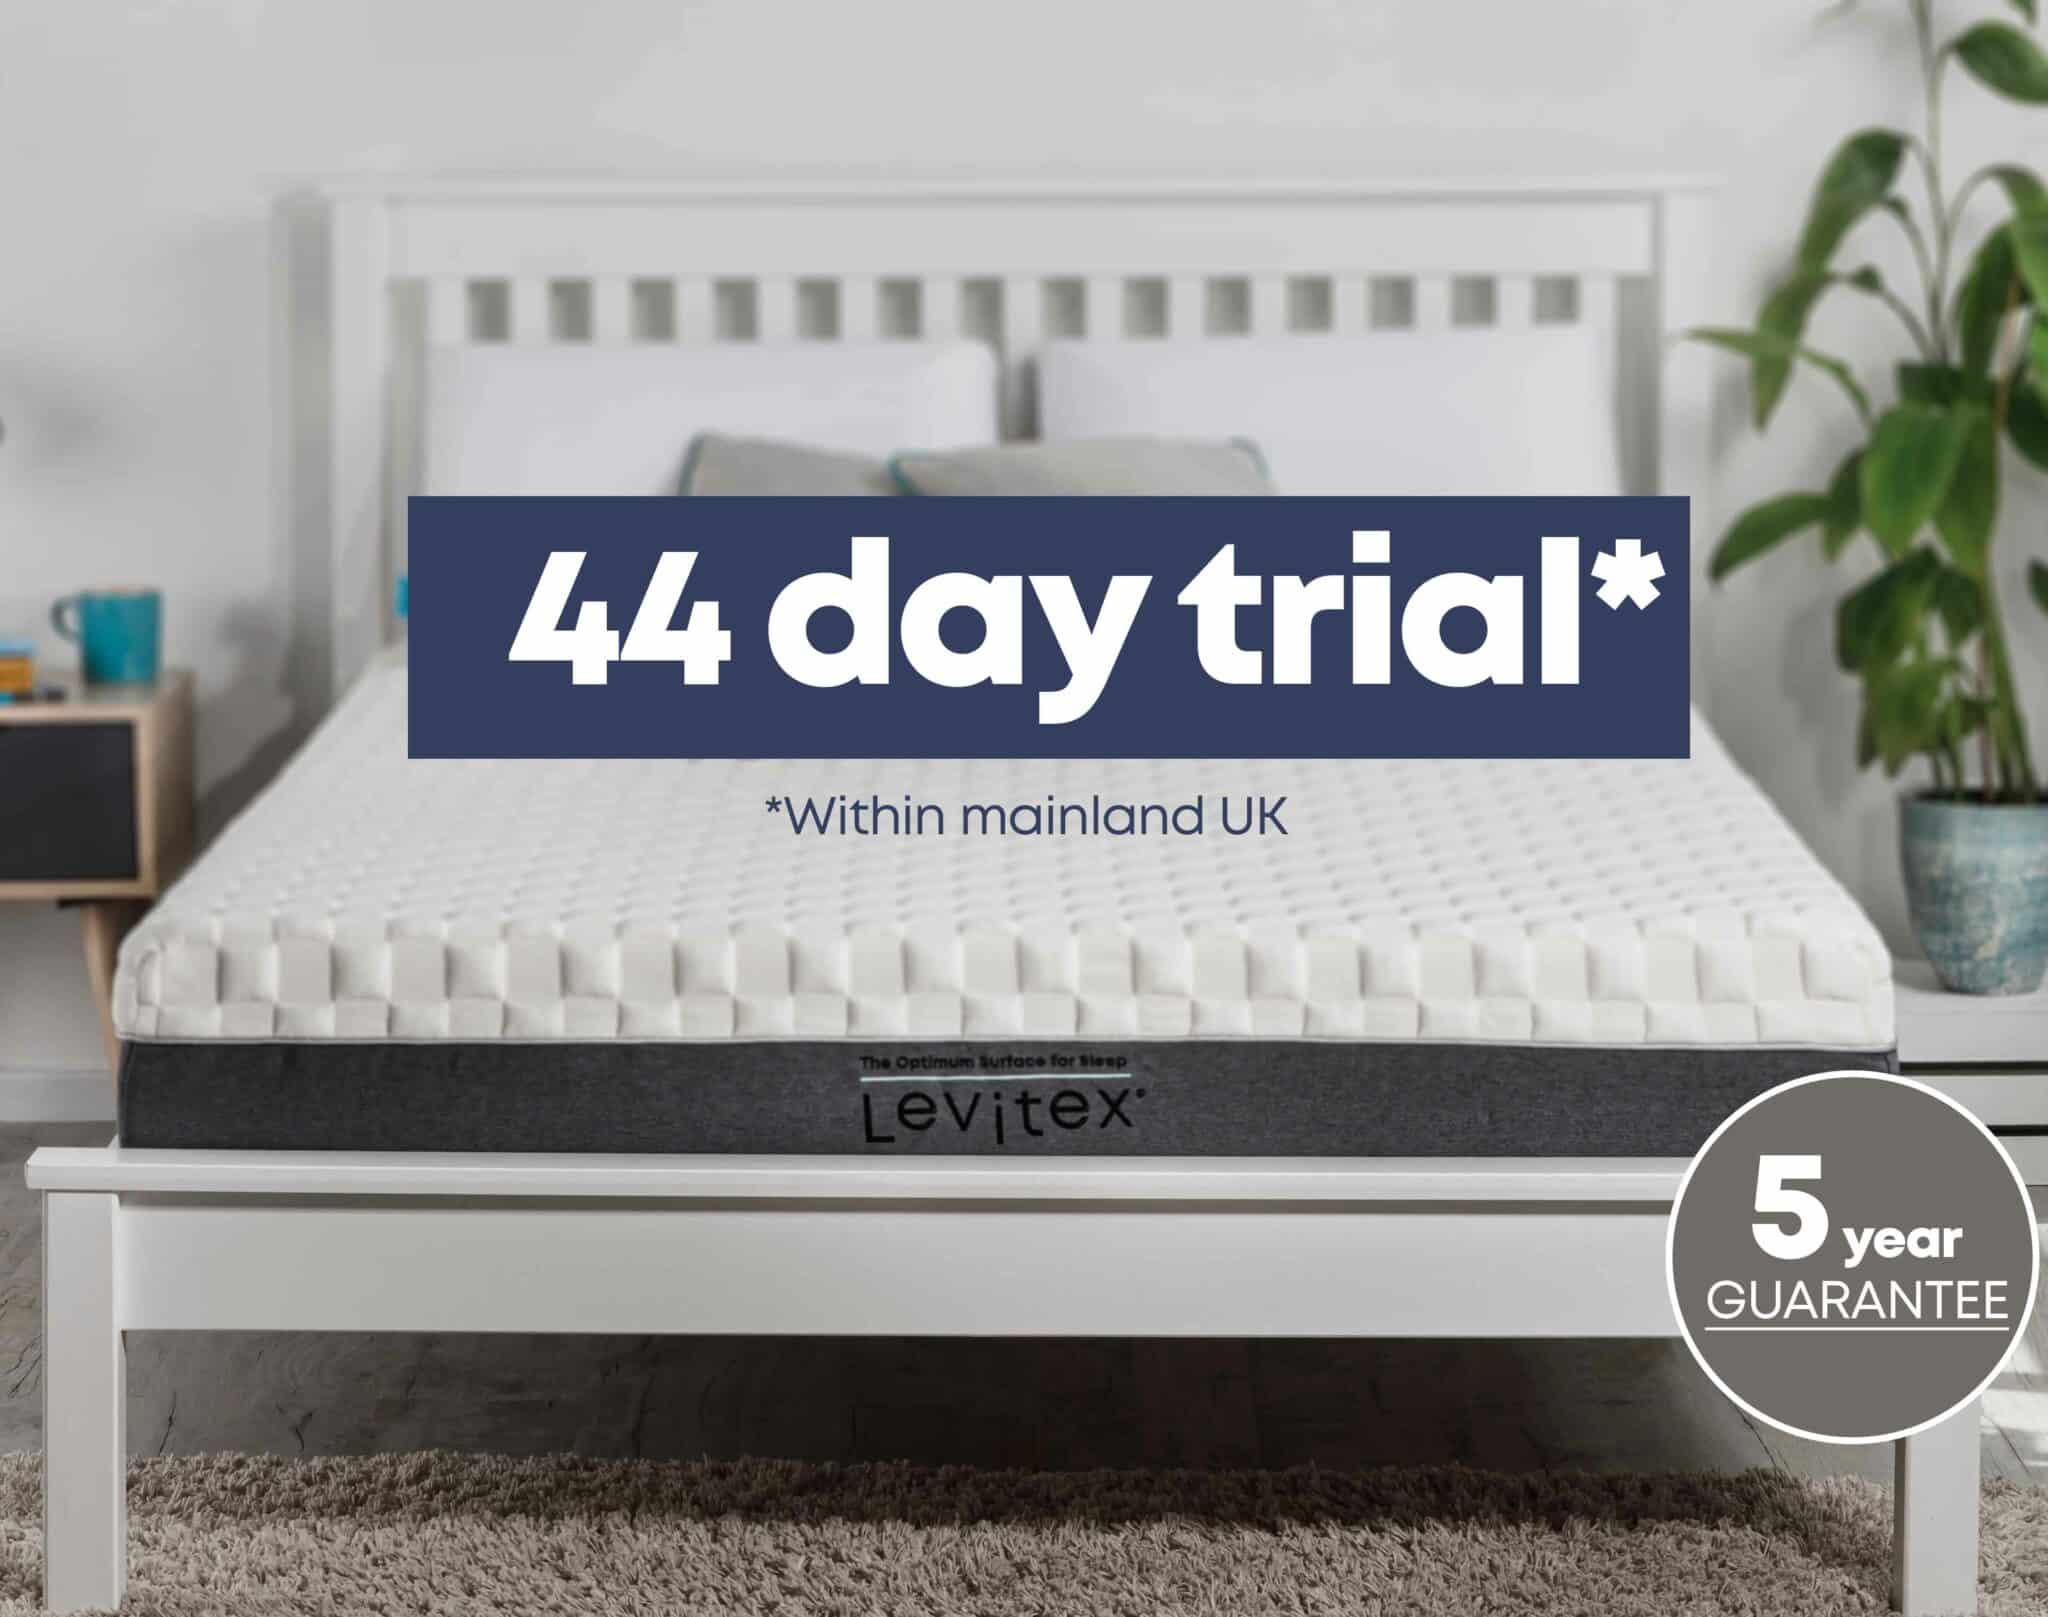 Levitex mattress 44 day trial and 5 year guarantee